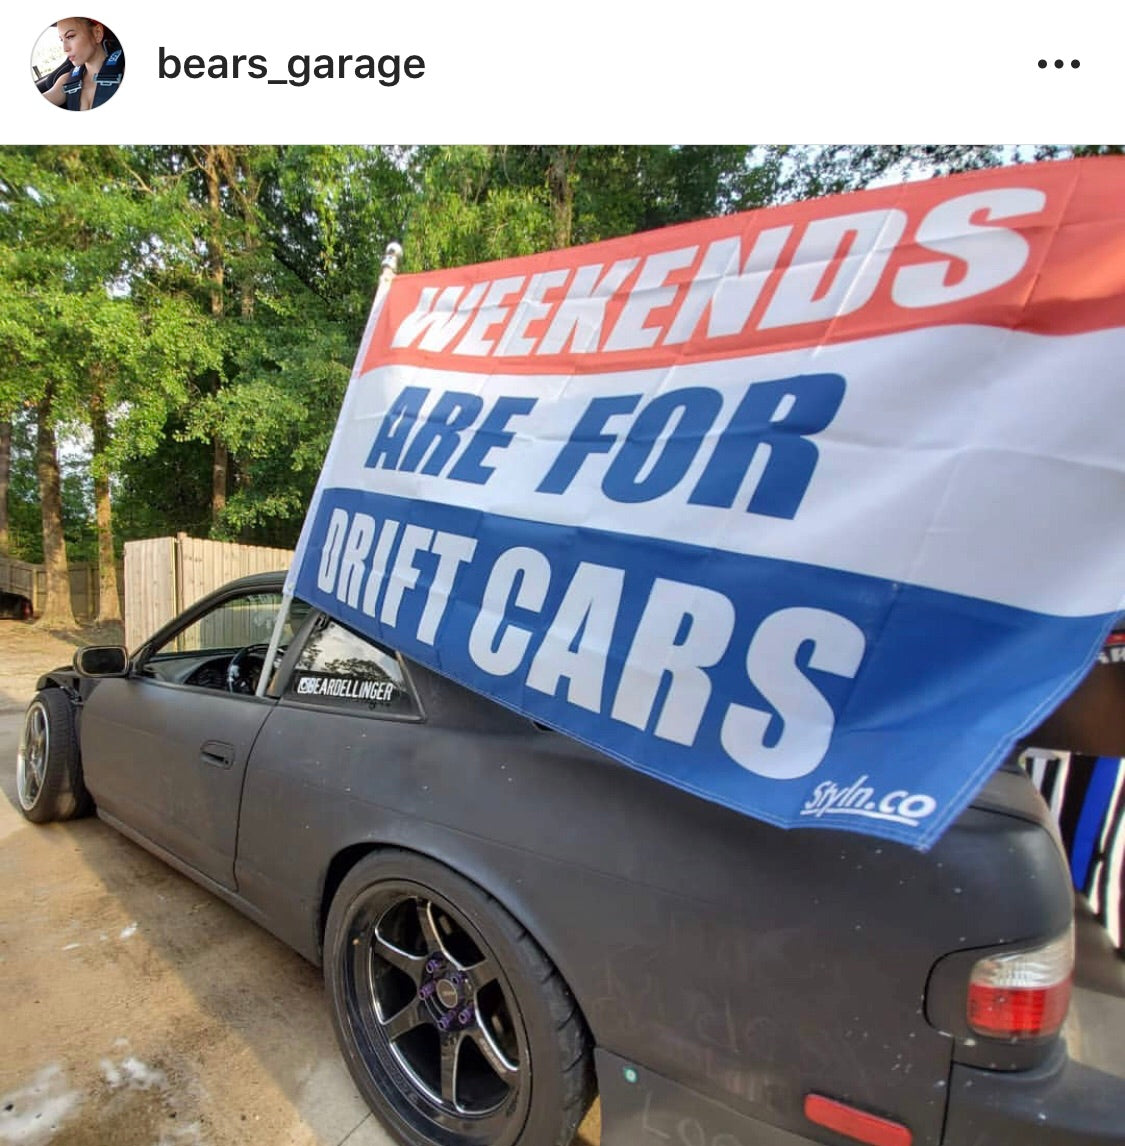 WEEKENDS ARE FOR DRIFT CARS Flag